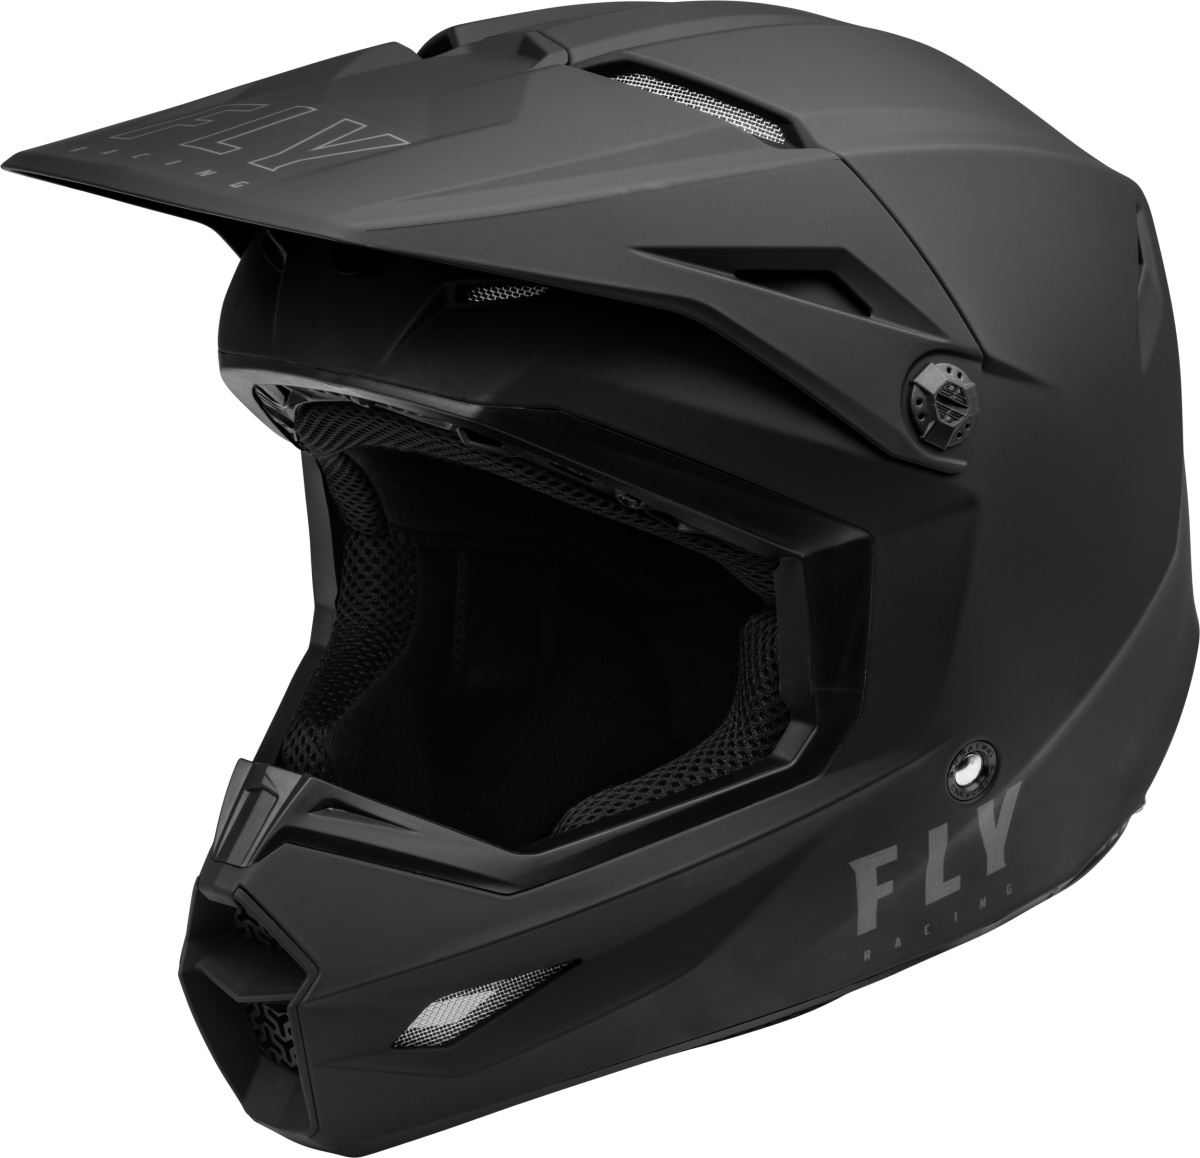 FLY RACING - YOUTH KINETIC SOLID HELMET - 73-3471YL - 191361367427